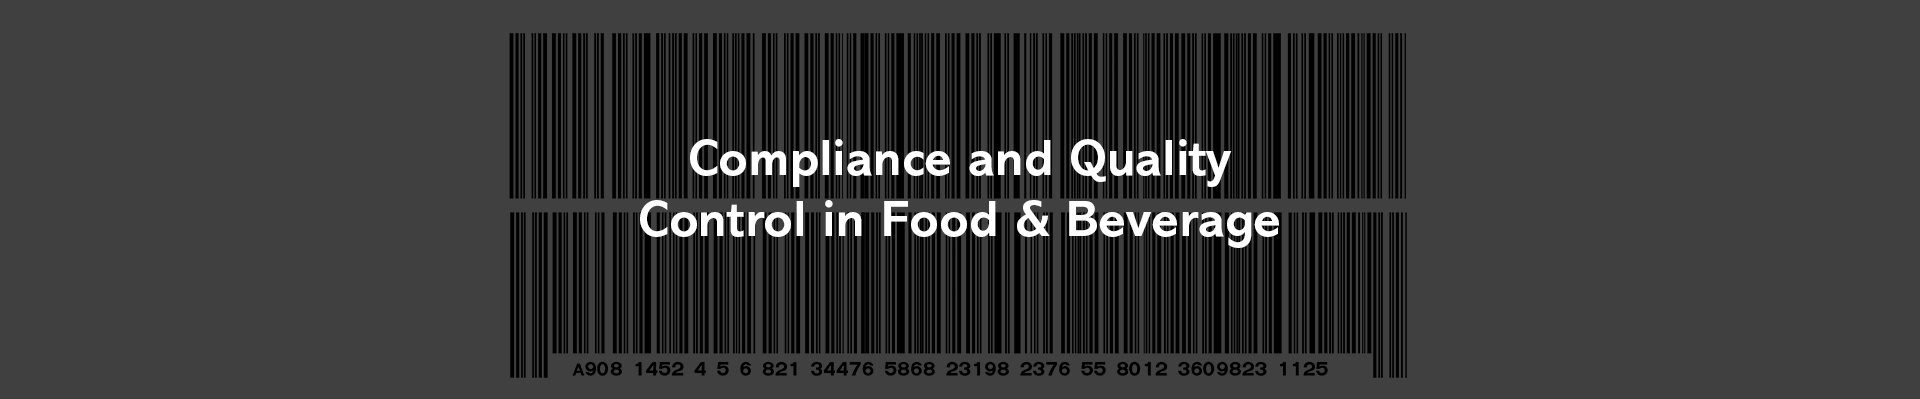 Compliance and Quality Control in Food & Beverage with Grantek’s Label Verification Solution